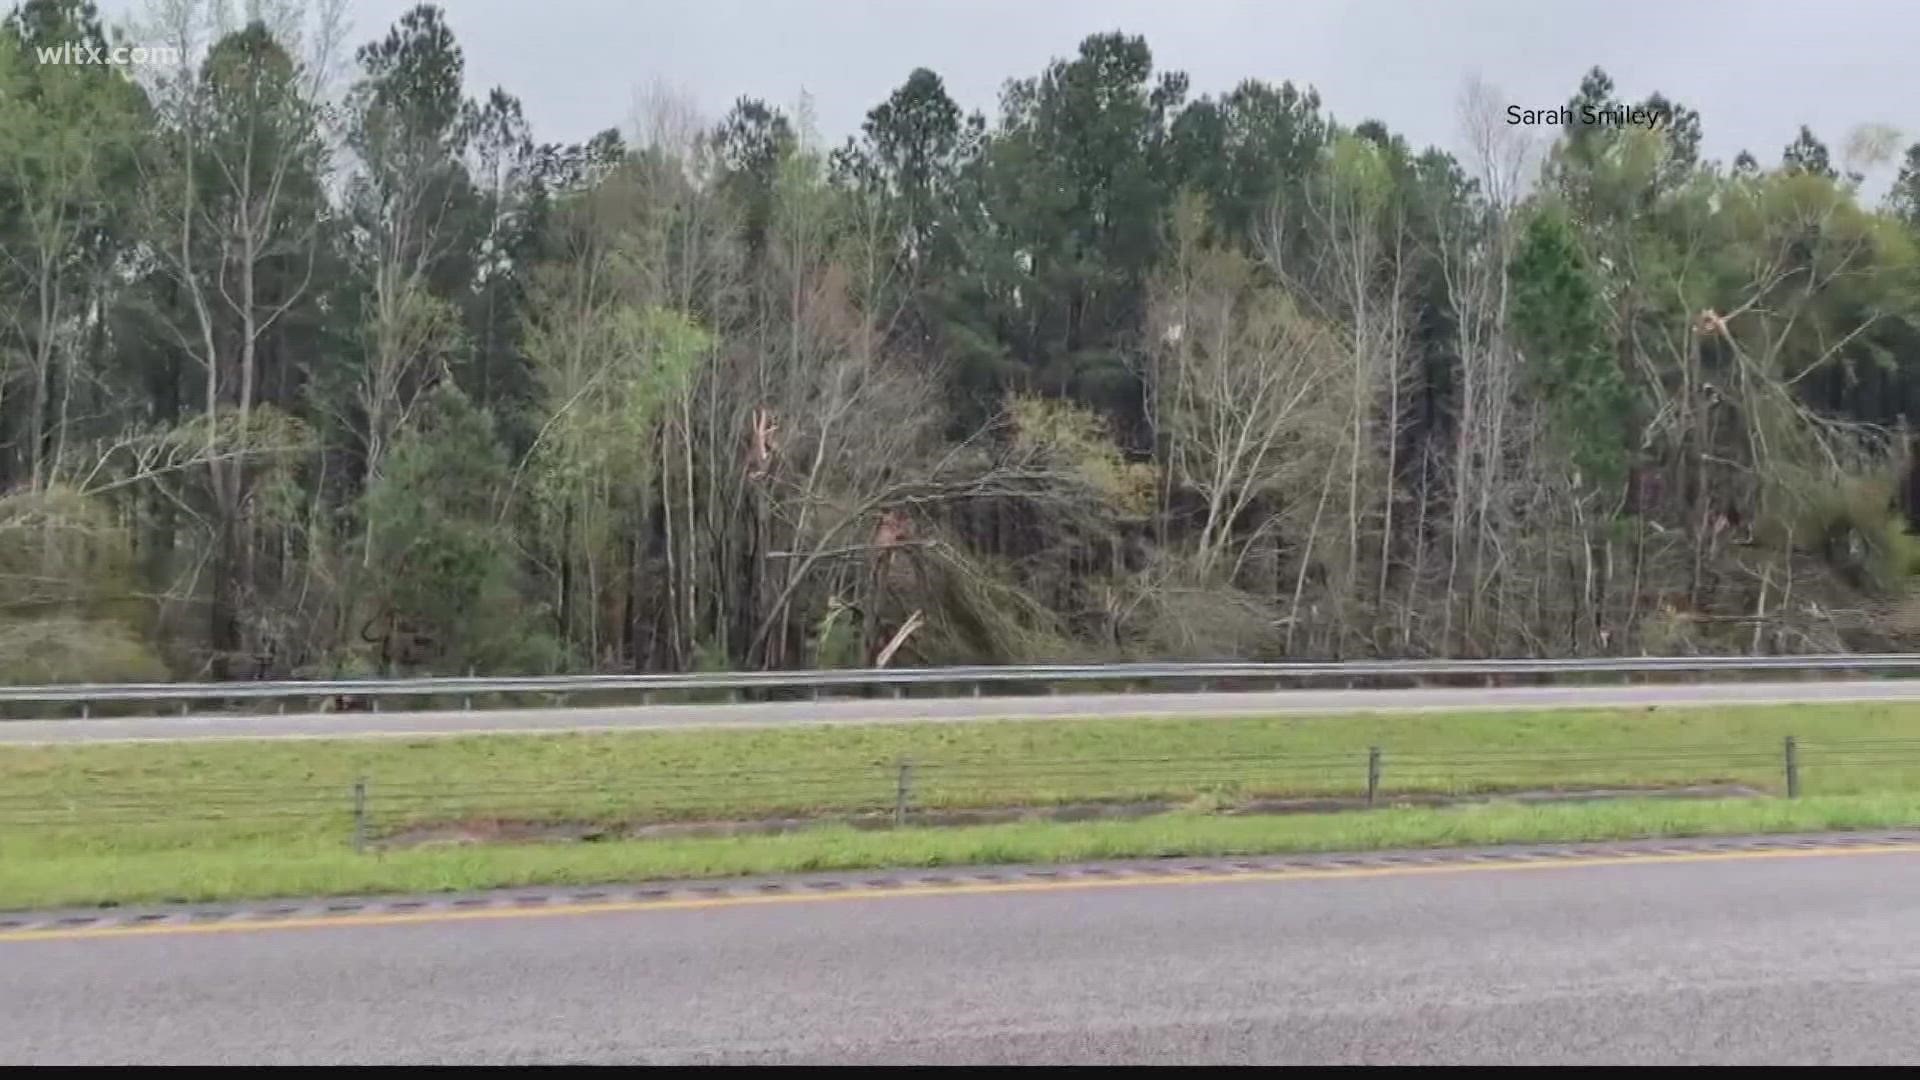 A day after severe weather and tornadoes ripped across South Carolina, residents described what they saw.